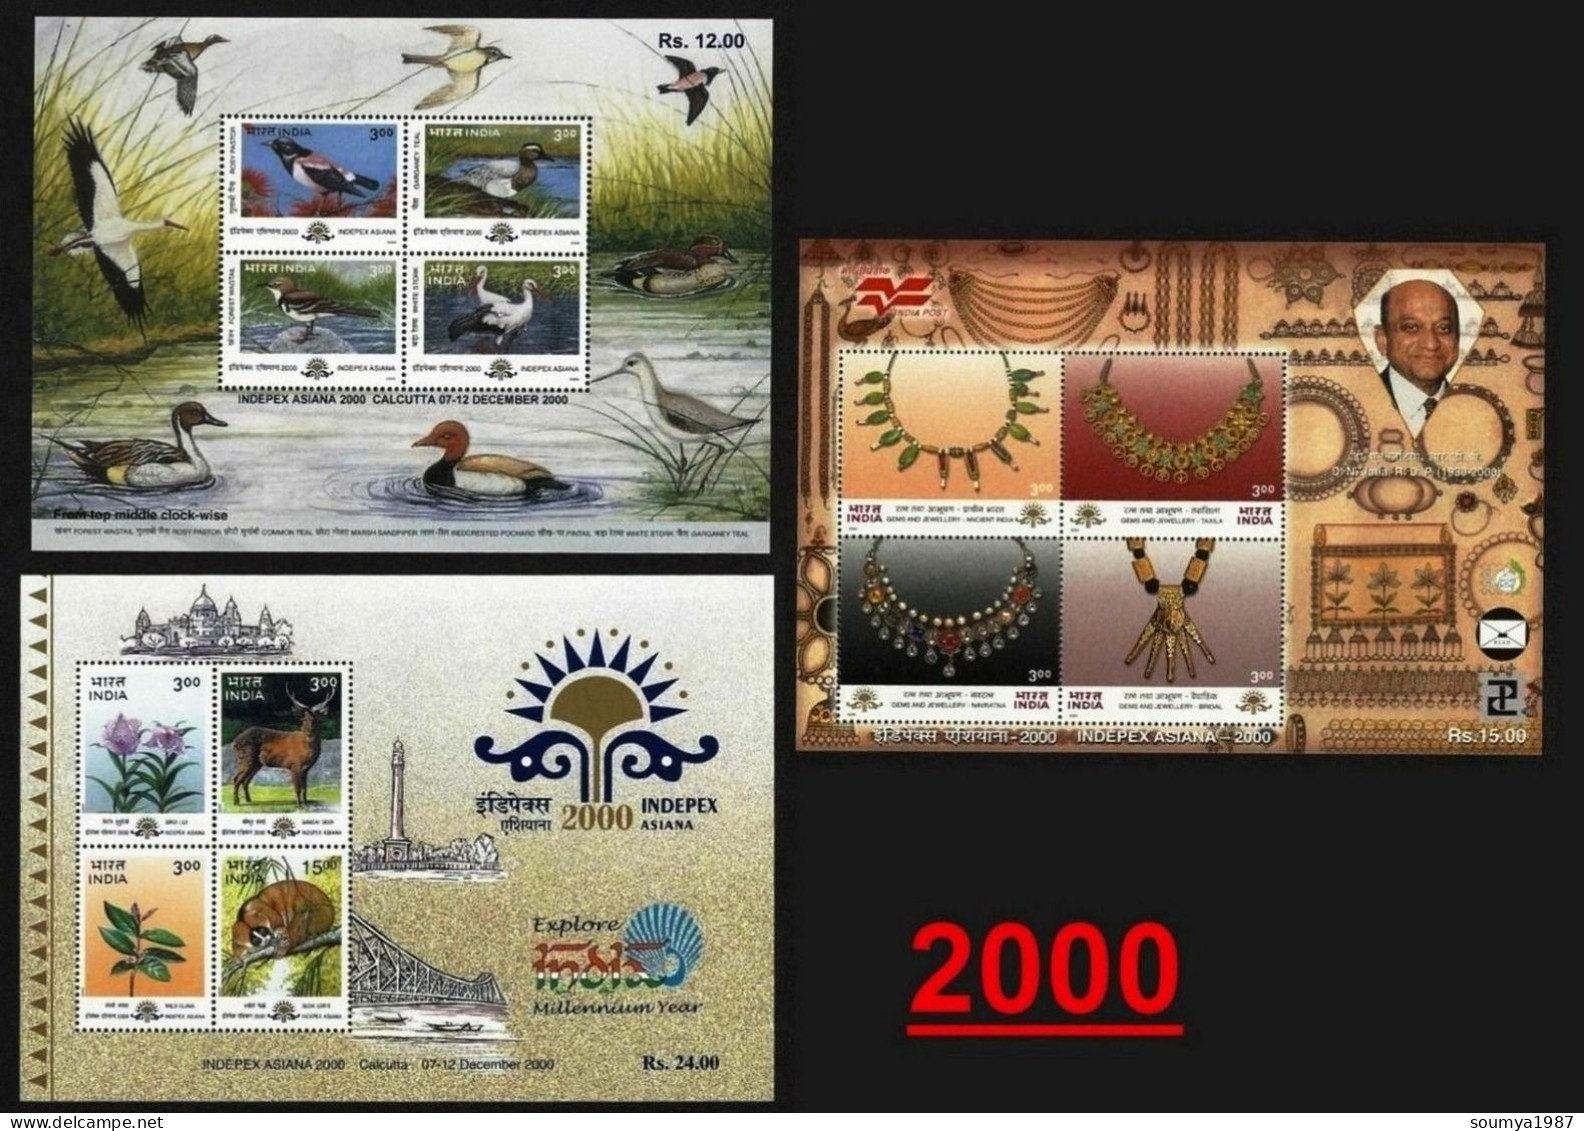 INDIA 2000 COMPLETE YEAR PACK OF MINIATURE SHEETS CONTAINS 3 MS OF FLOWERS, ANIMALS, BIRDS, JUALARY, INDIPEX MS MNH - Neufs